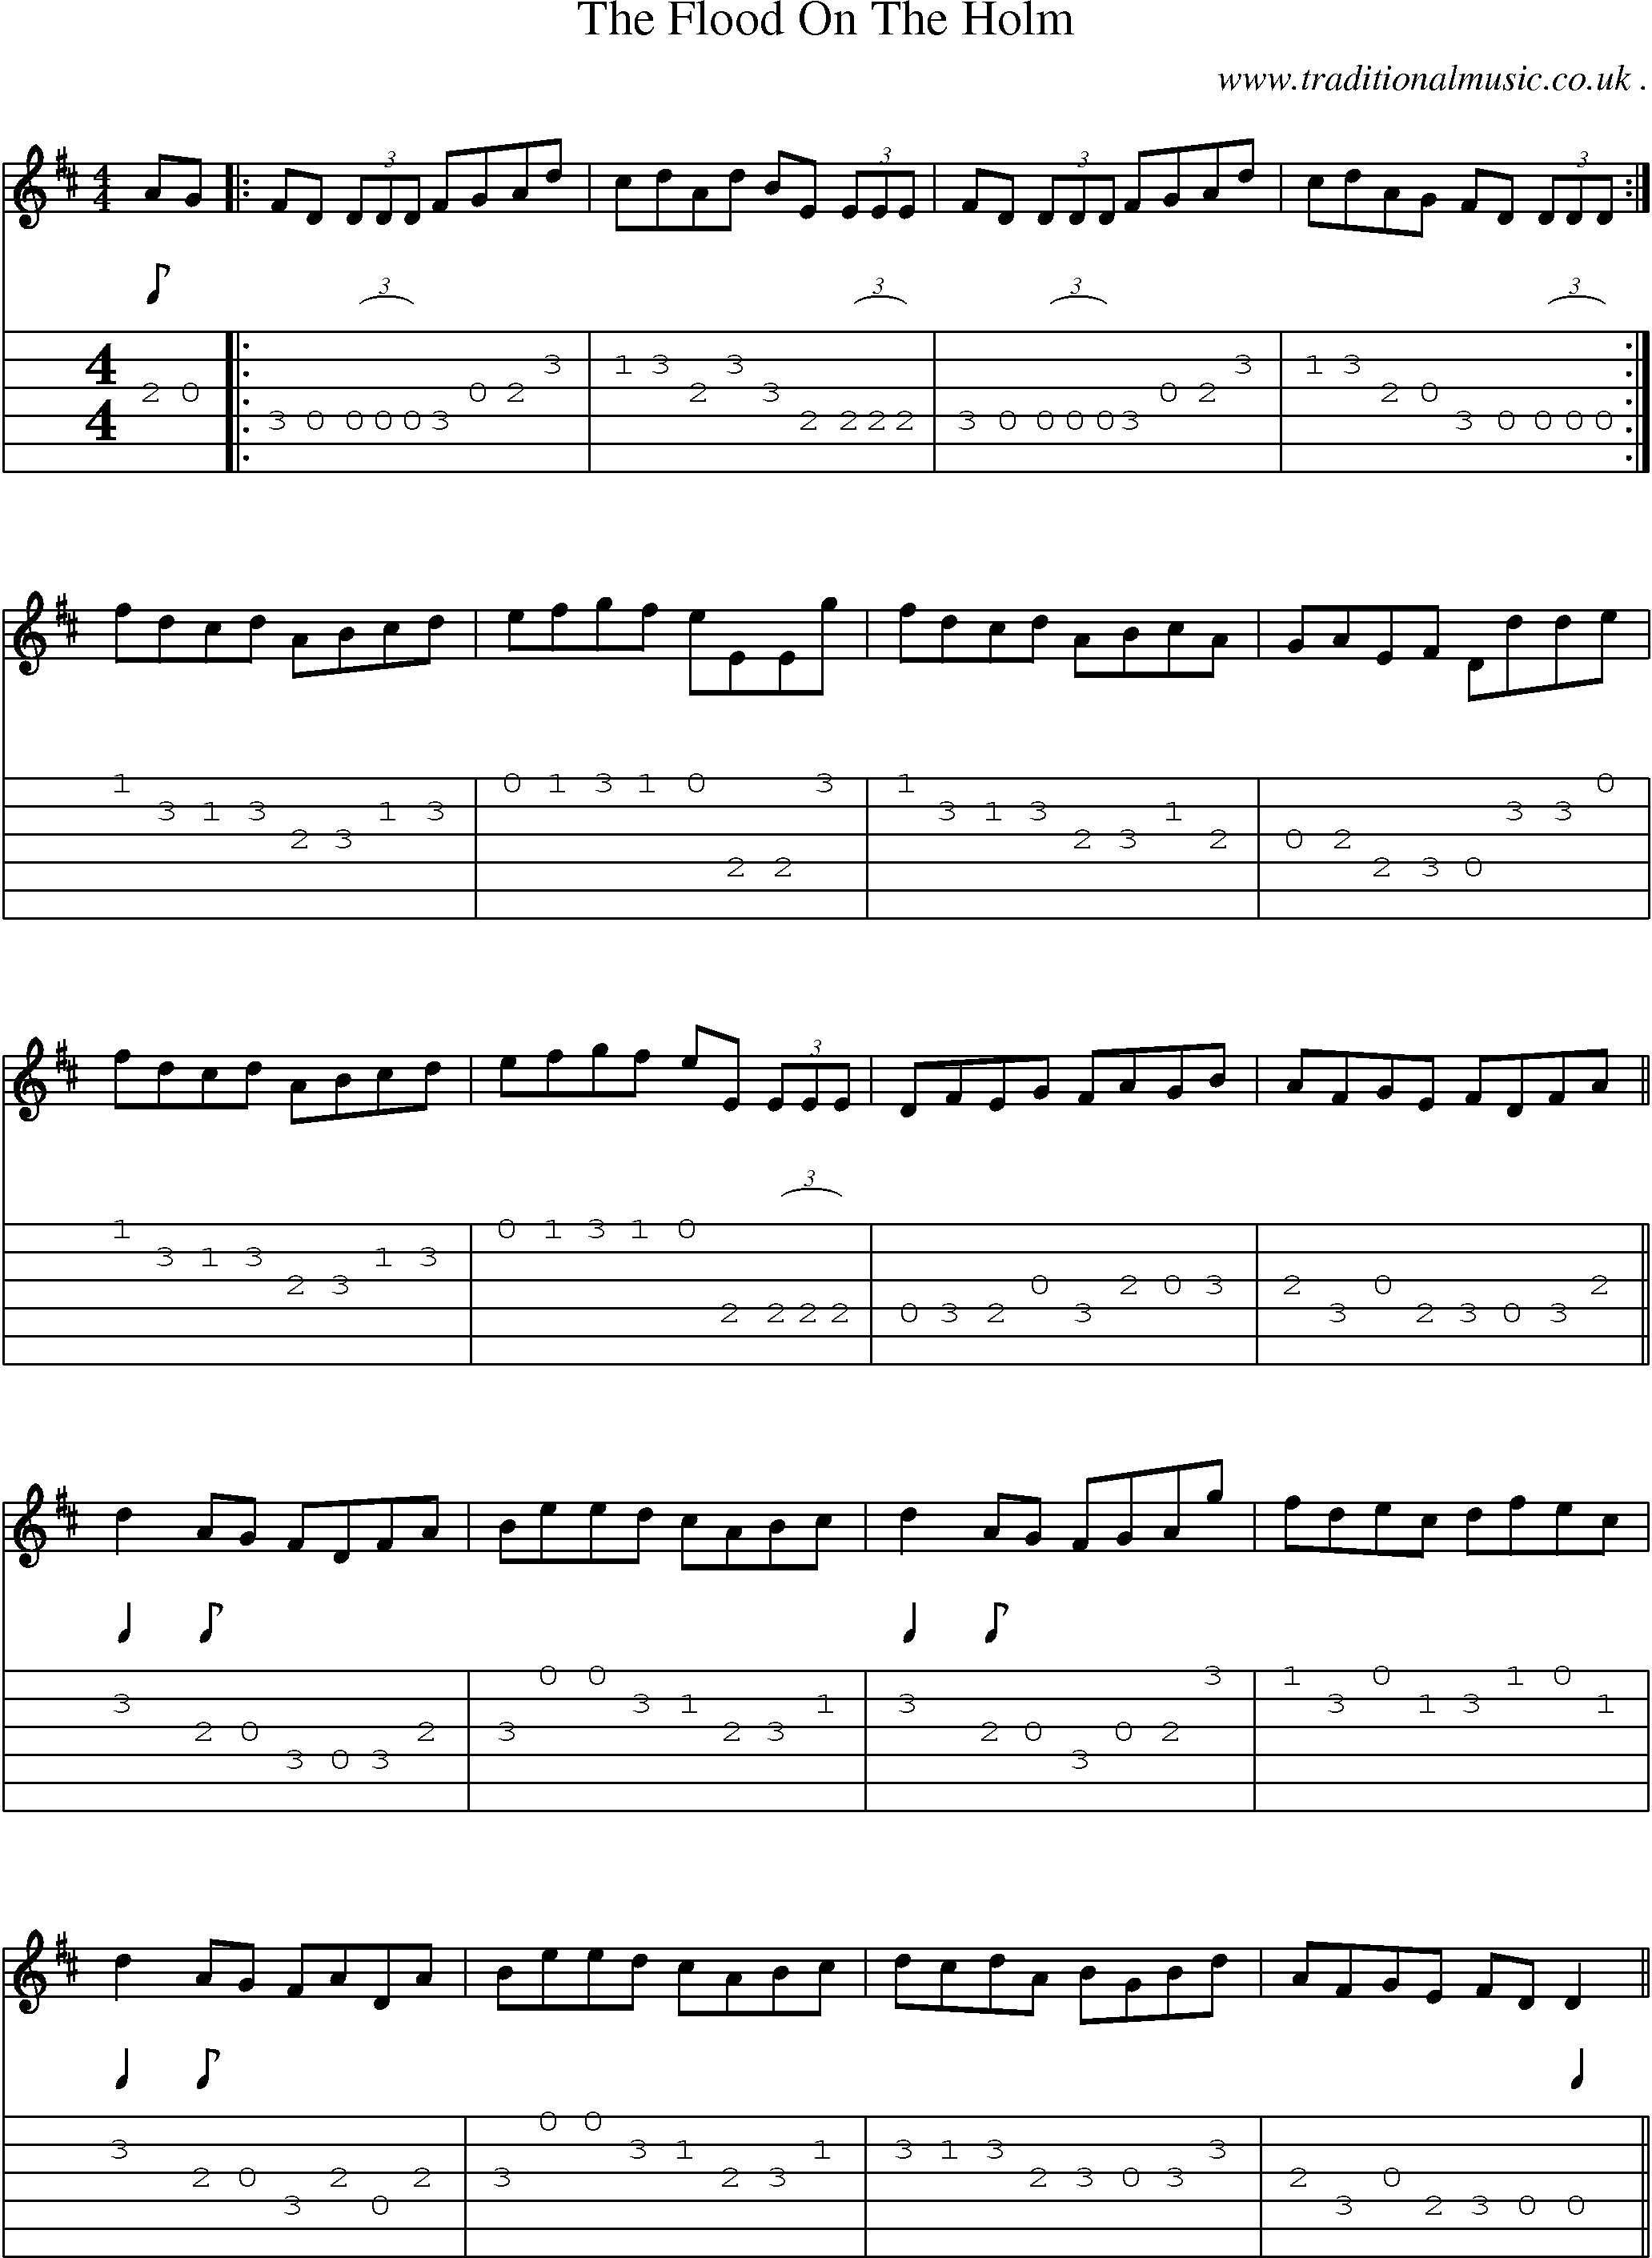 Sheet-Music and Guitar Tabs for The Flood On The Holm